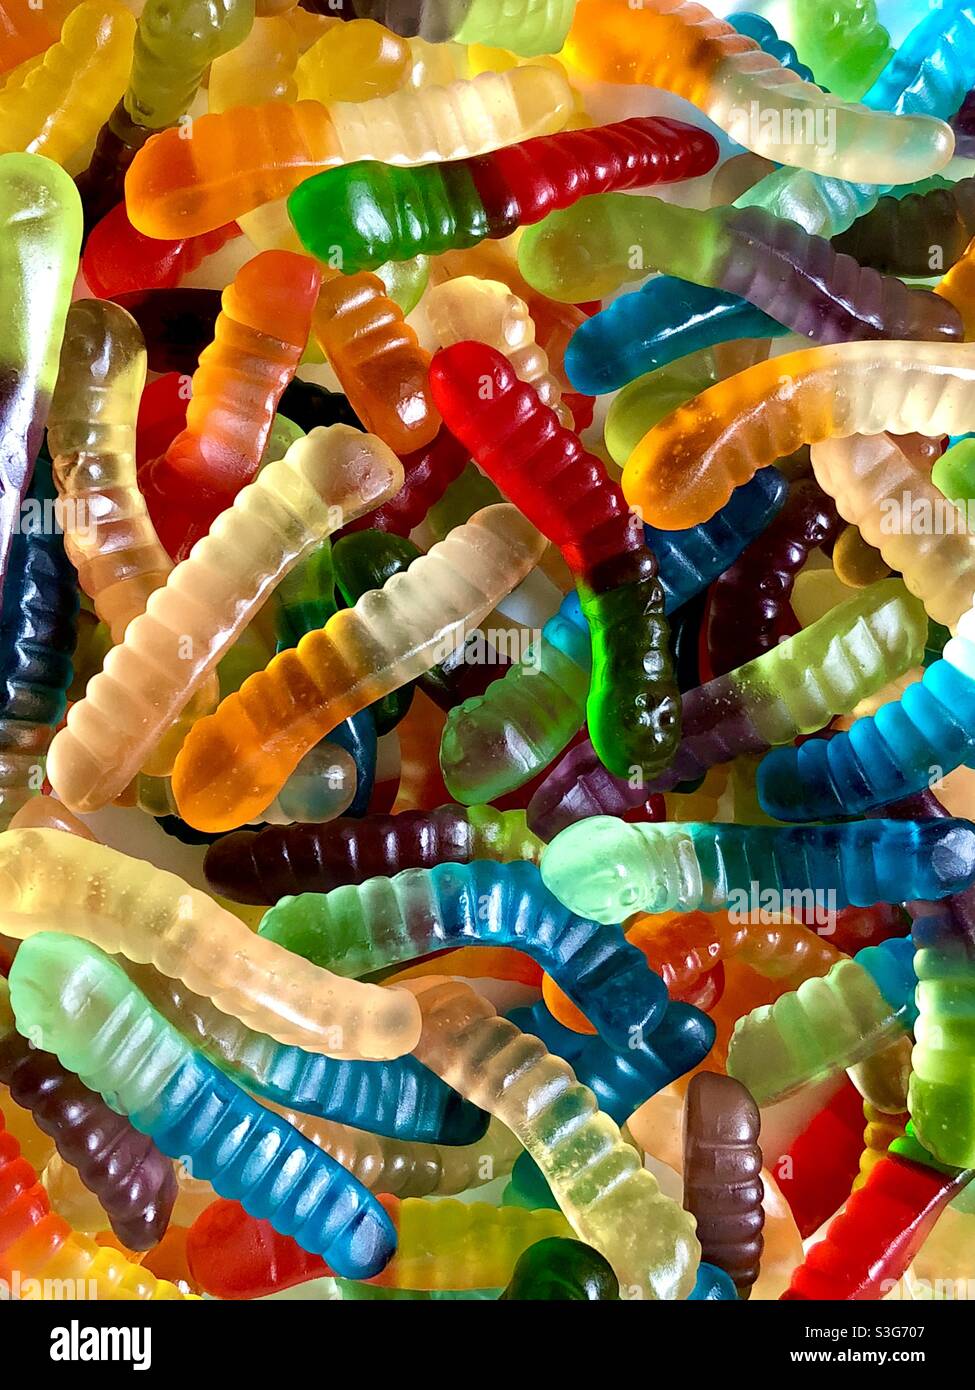 Full frame of colorful gummy worms Stock Photo